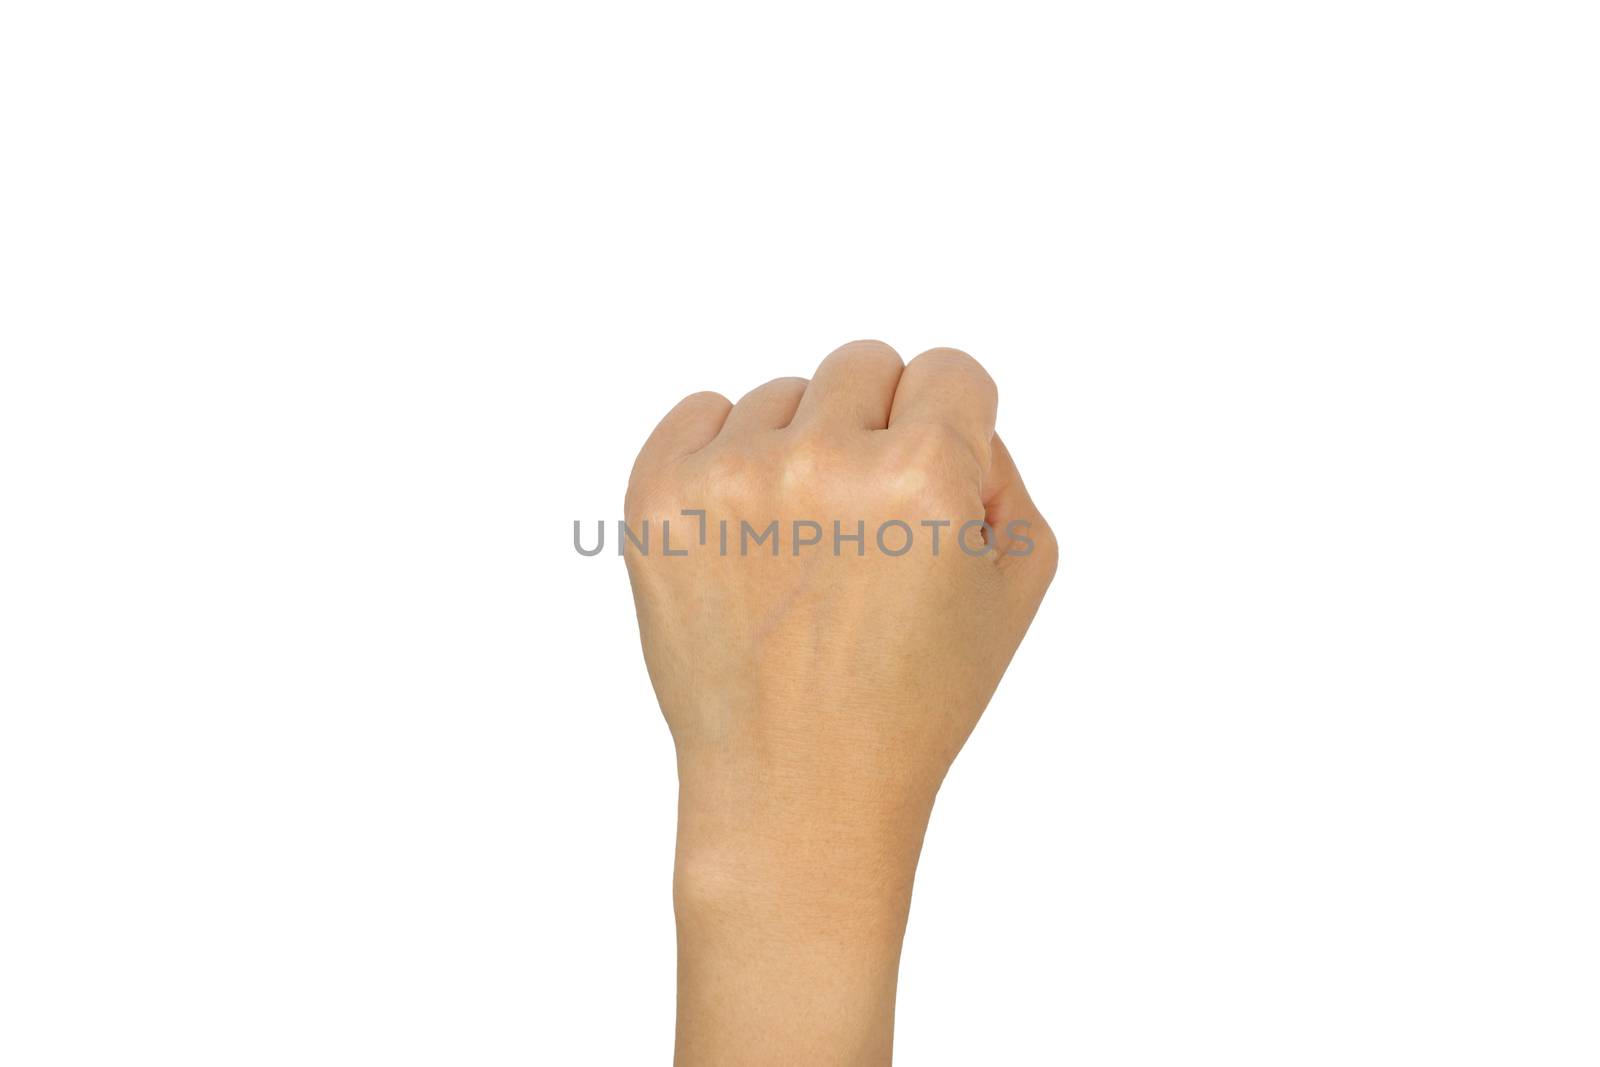 Hand raised up clenched fist isolated on white background.